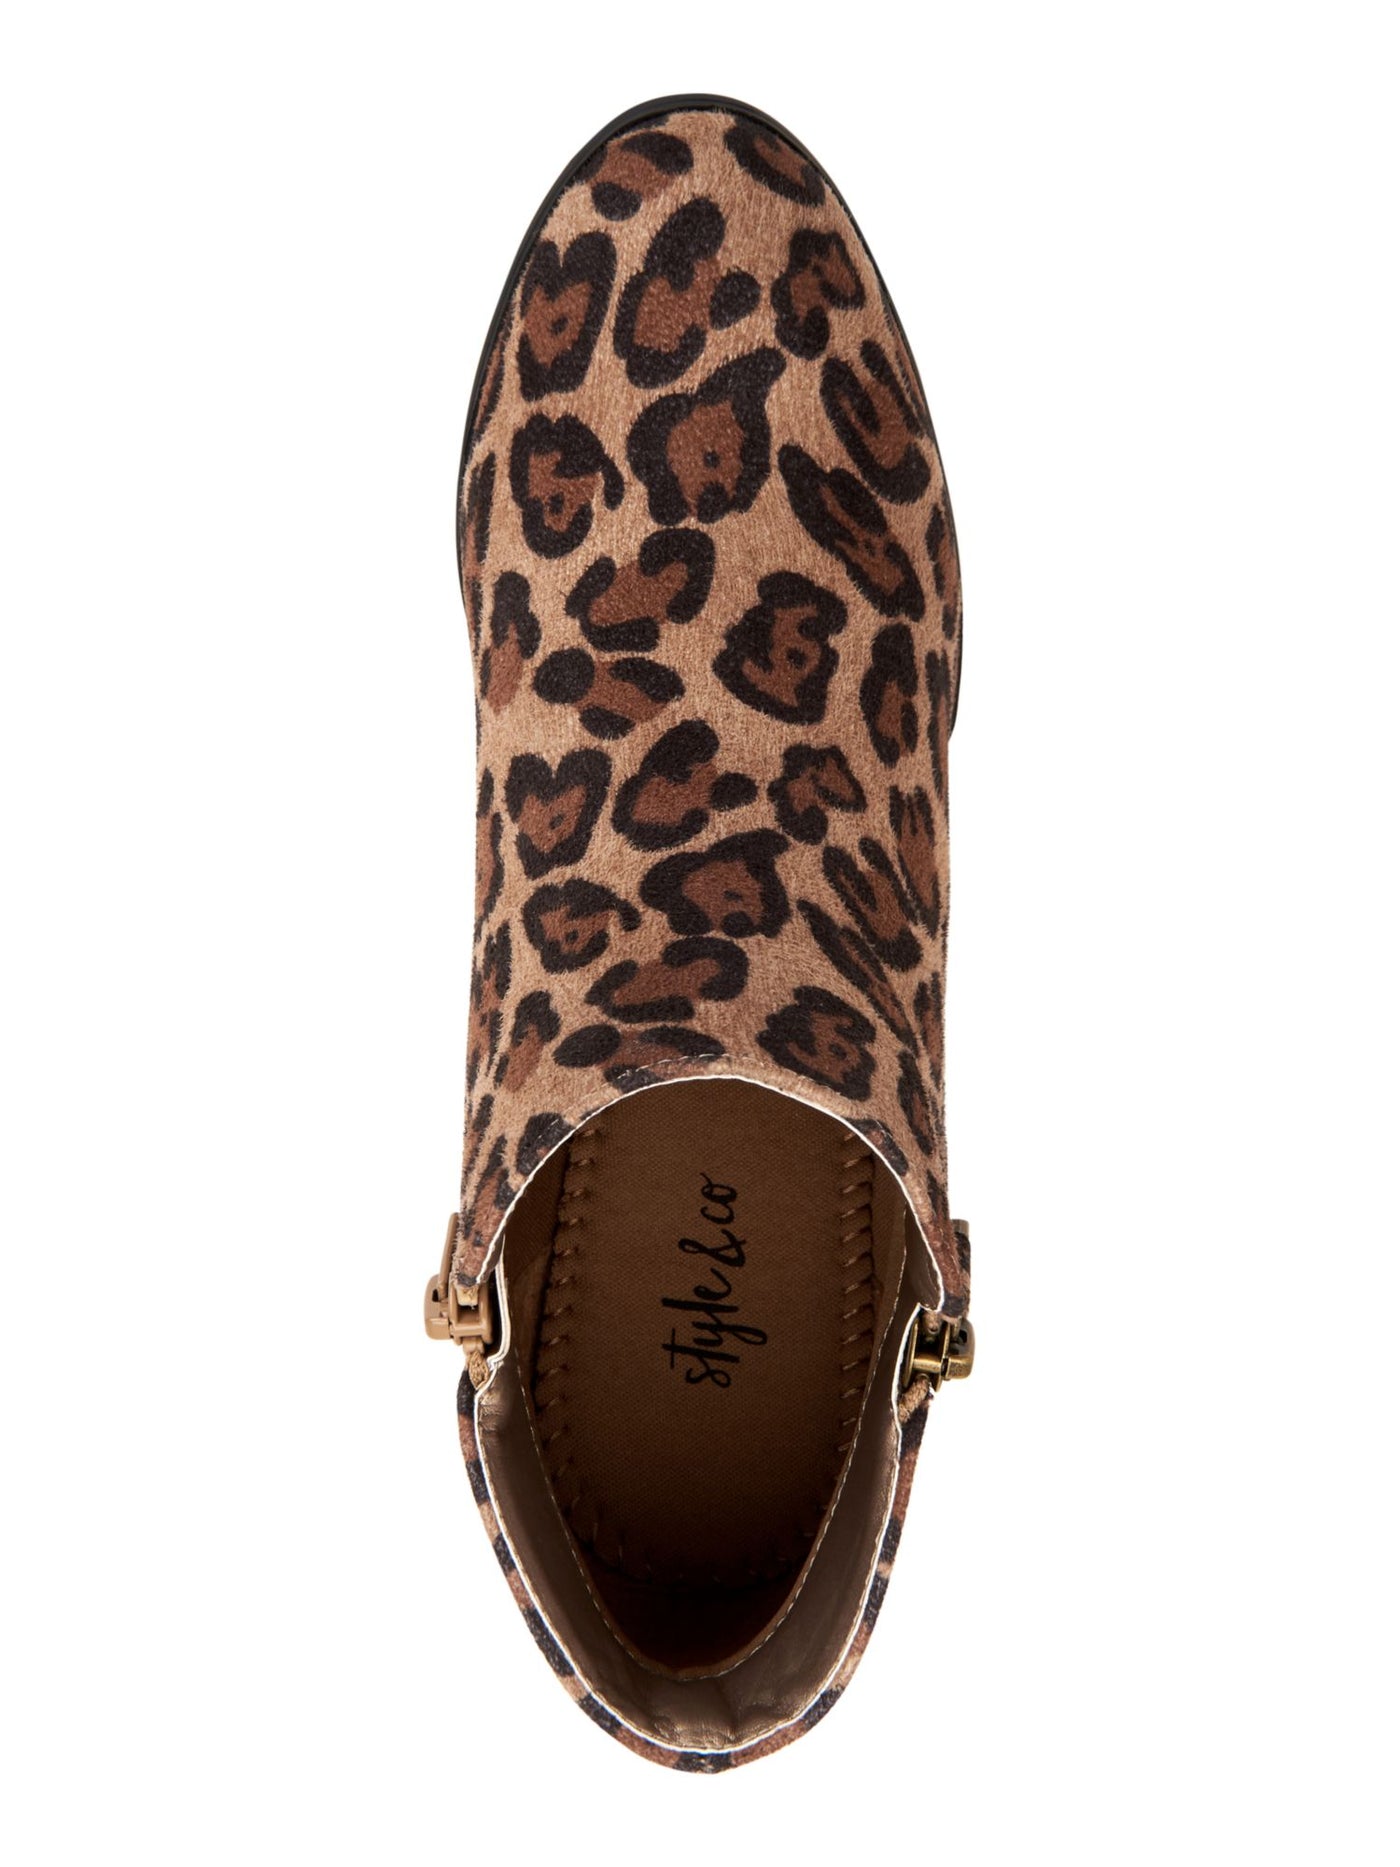 STYLE & COMPANY Womens Brown Animal Print Leopard Print Notched At Sides Cushioned Zipper Accent Masrinaa Almond Toe Block Heel Booties W